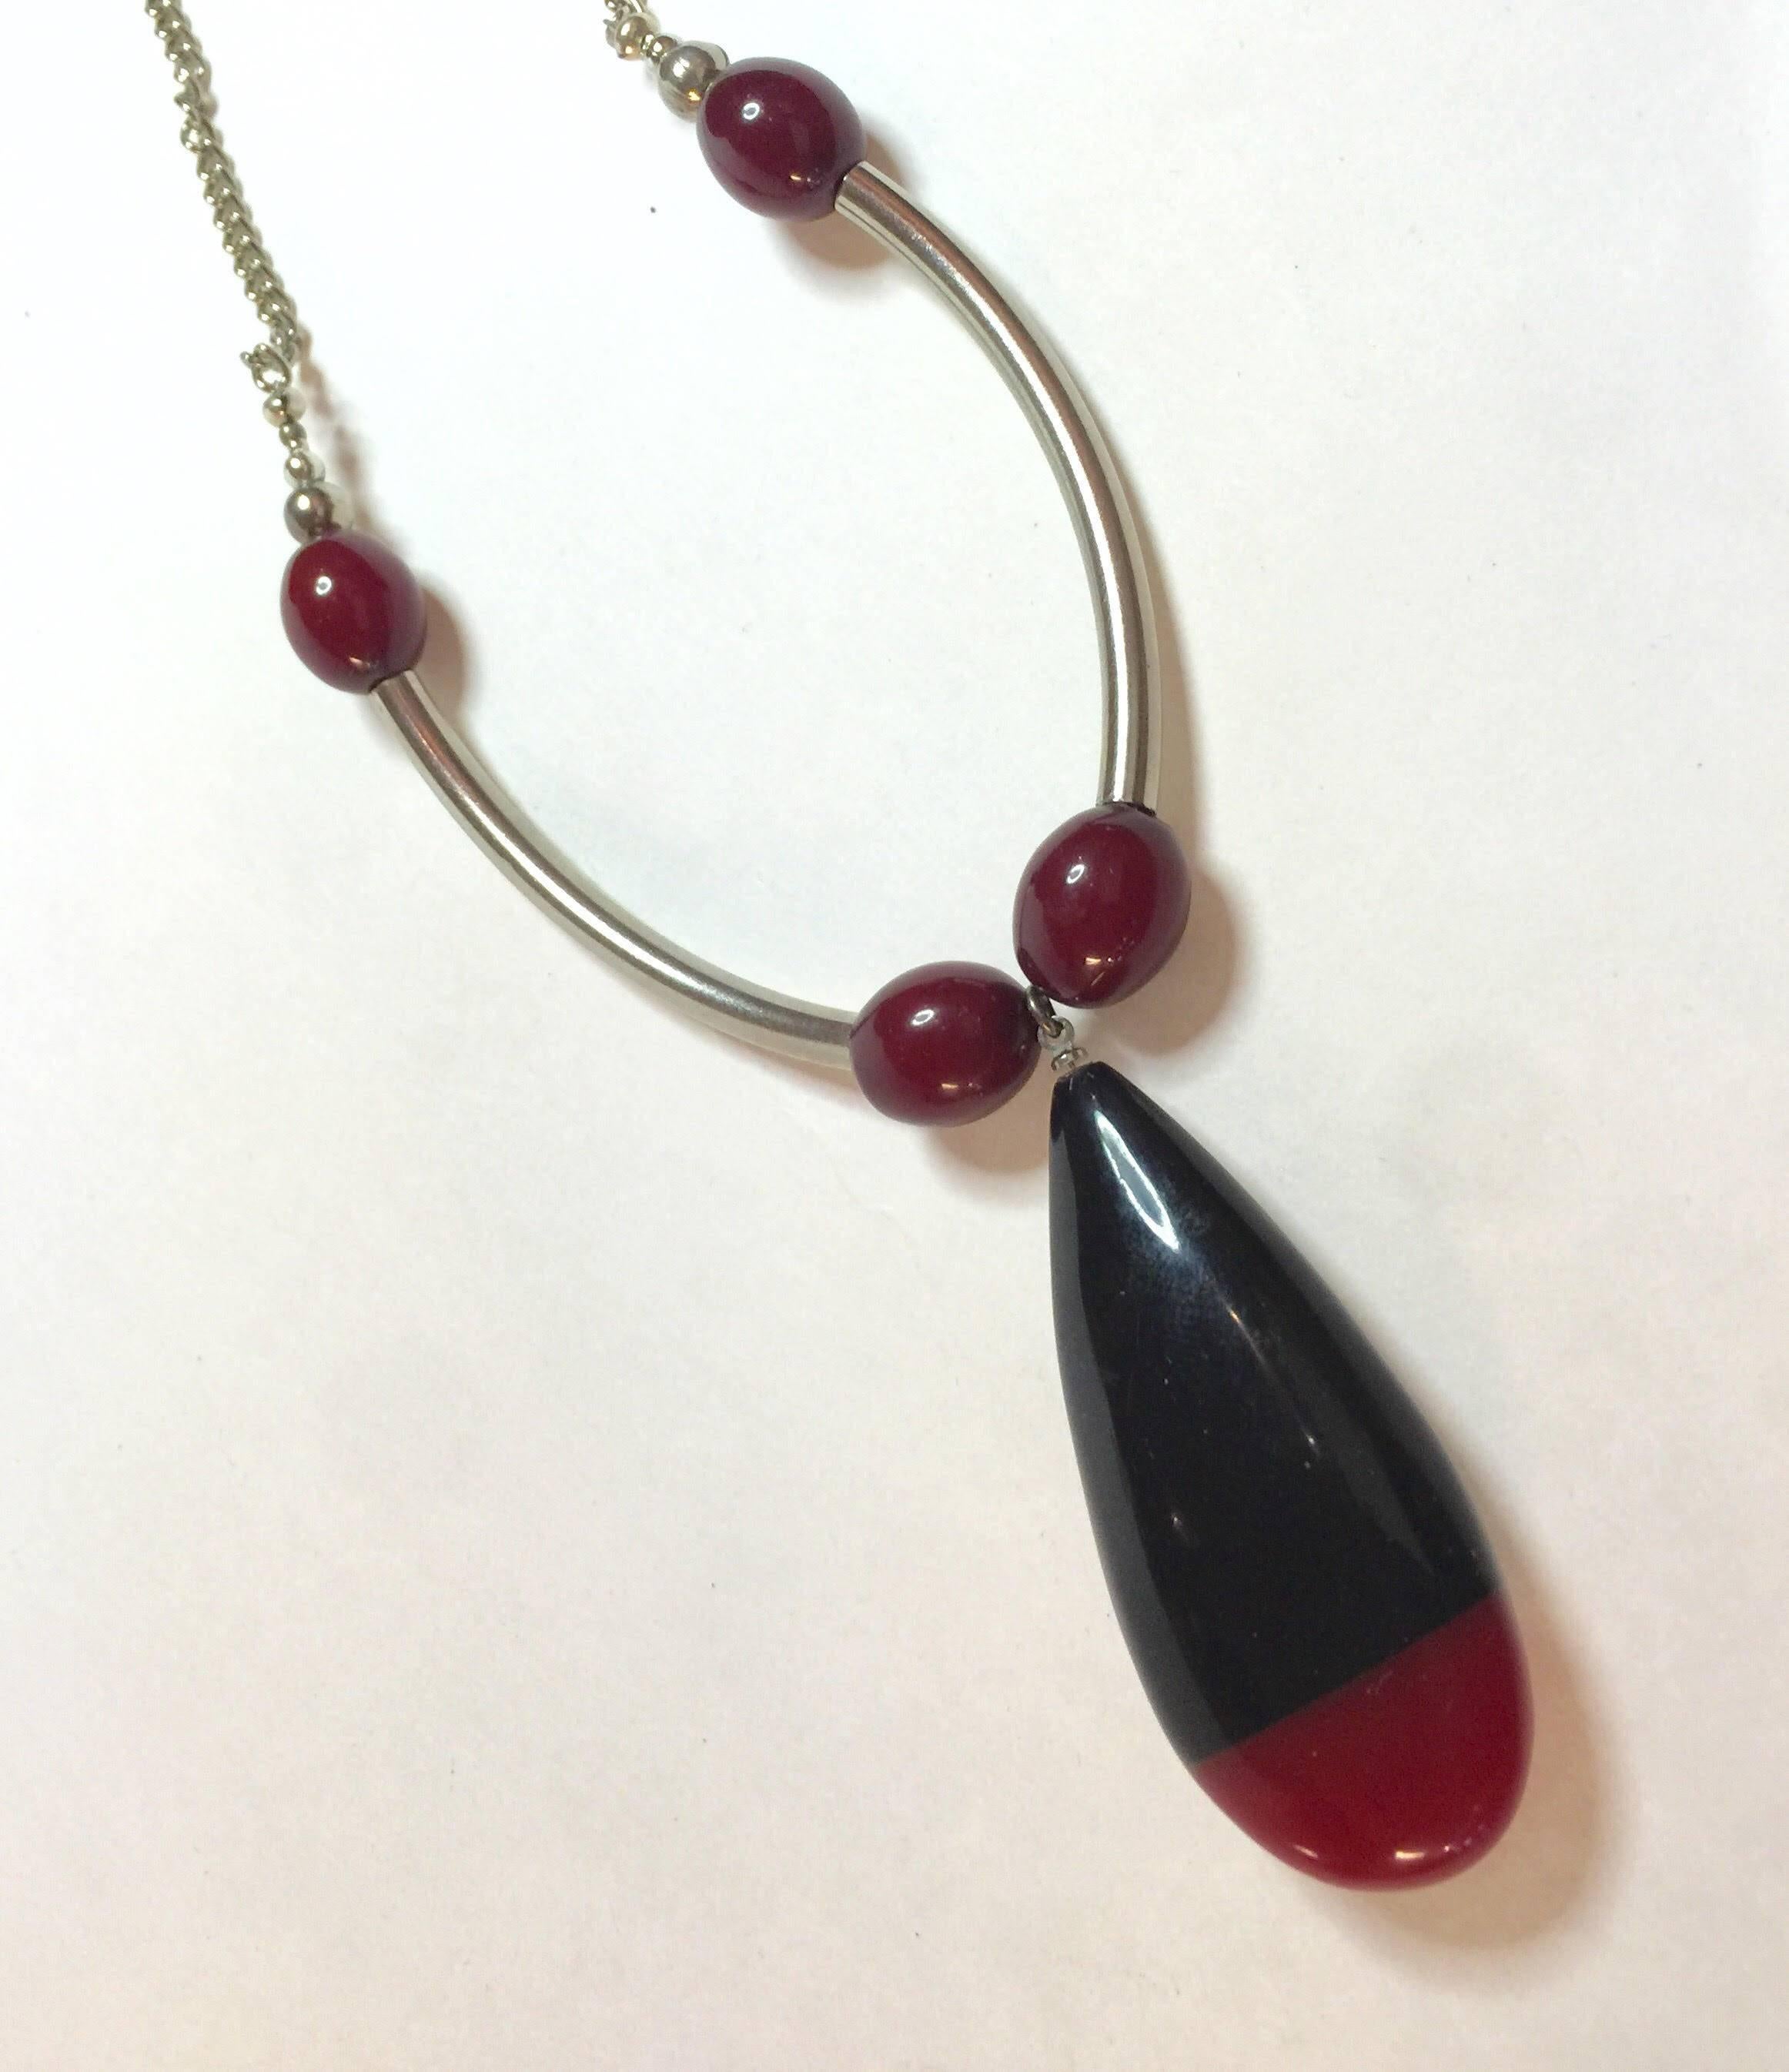 1930s Art Deco German Red Black Galalith Chrome Necklace Jacob Bengel For Sale 2